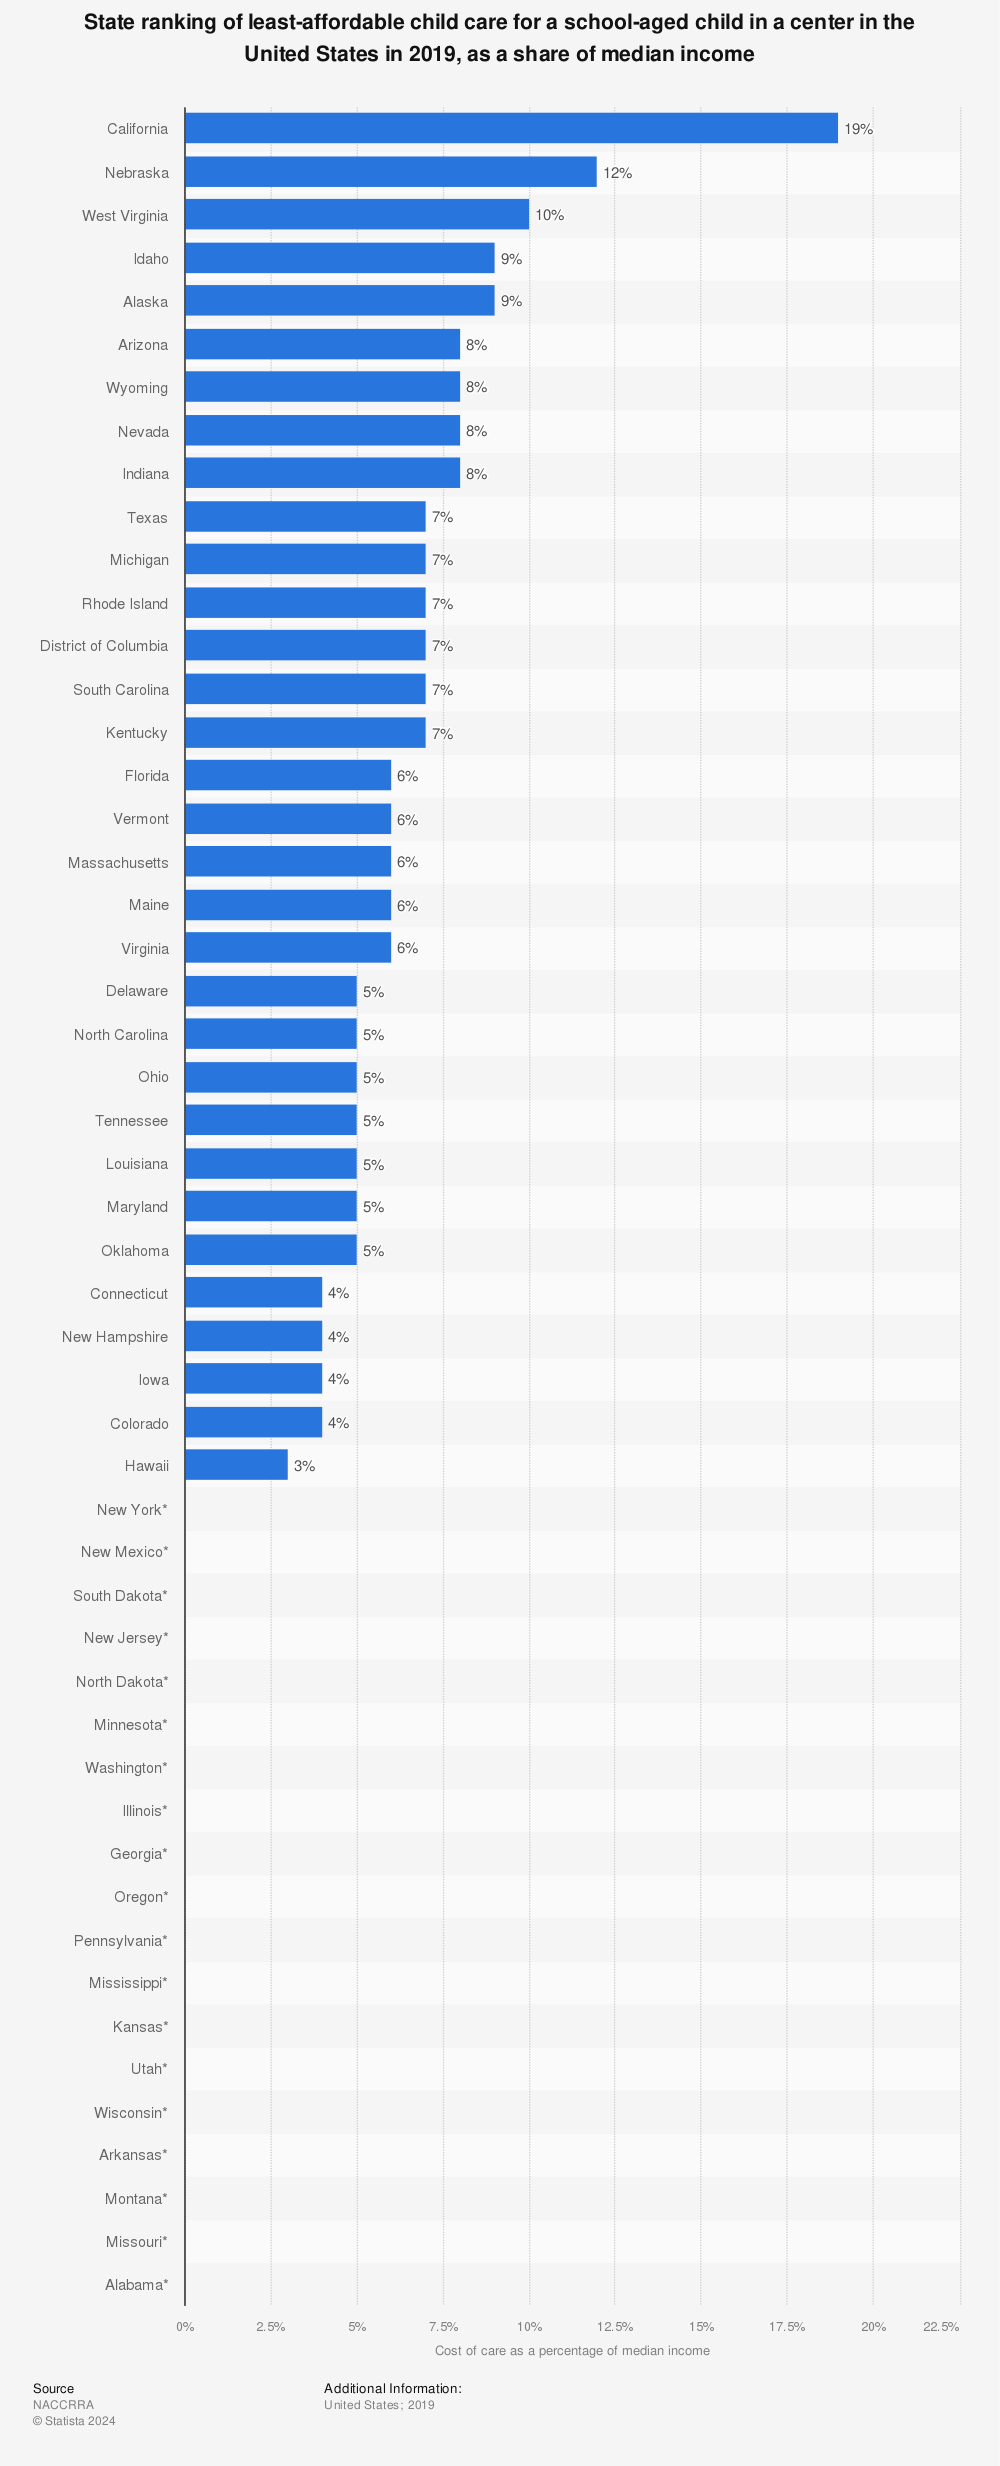 Statistic: State ranking of least-affordable child care for a school-aged child in a center in the United States in 2019, as a share of median income | Statista